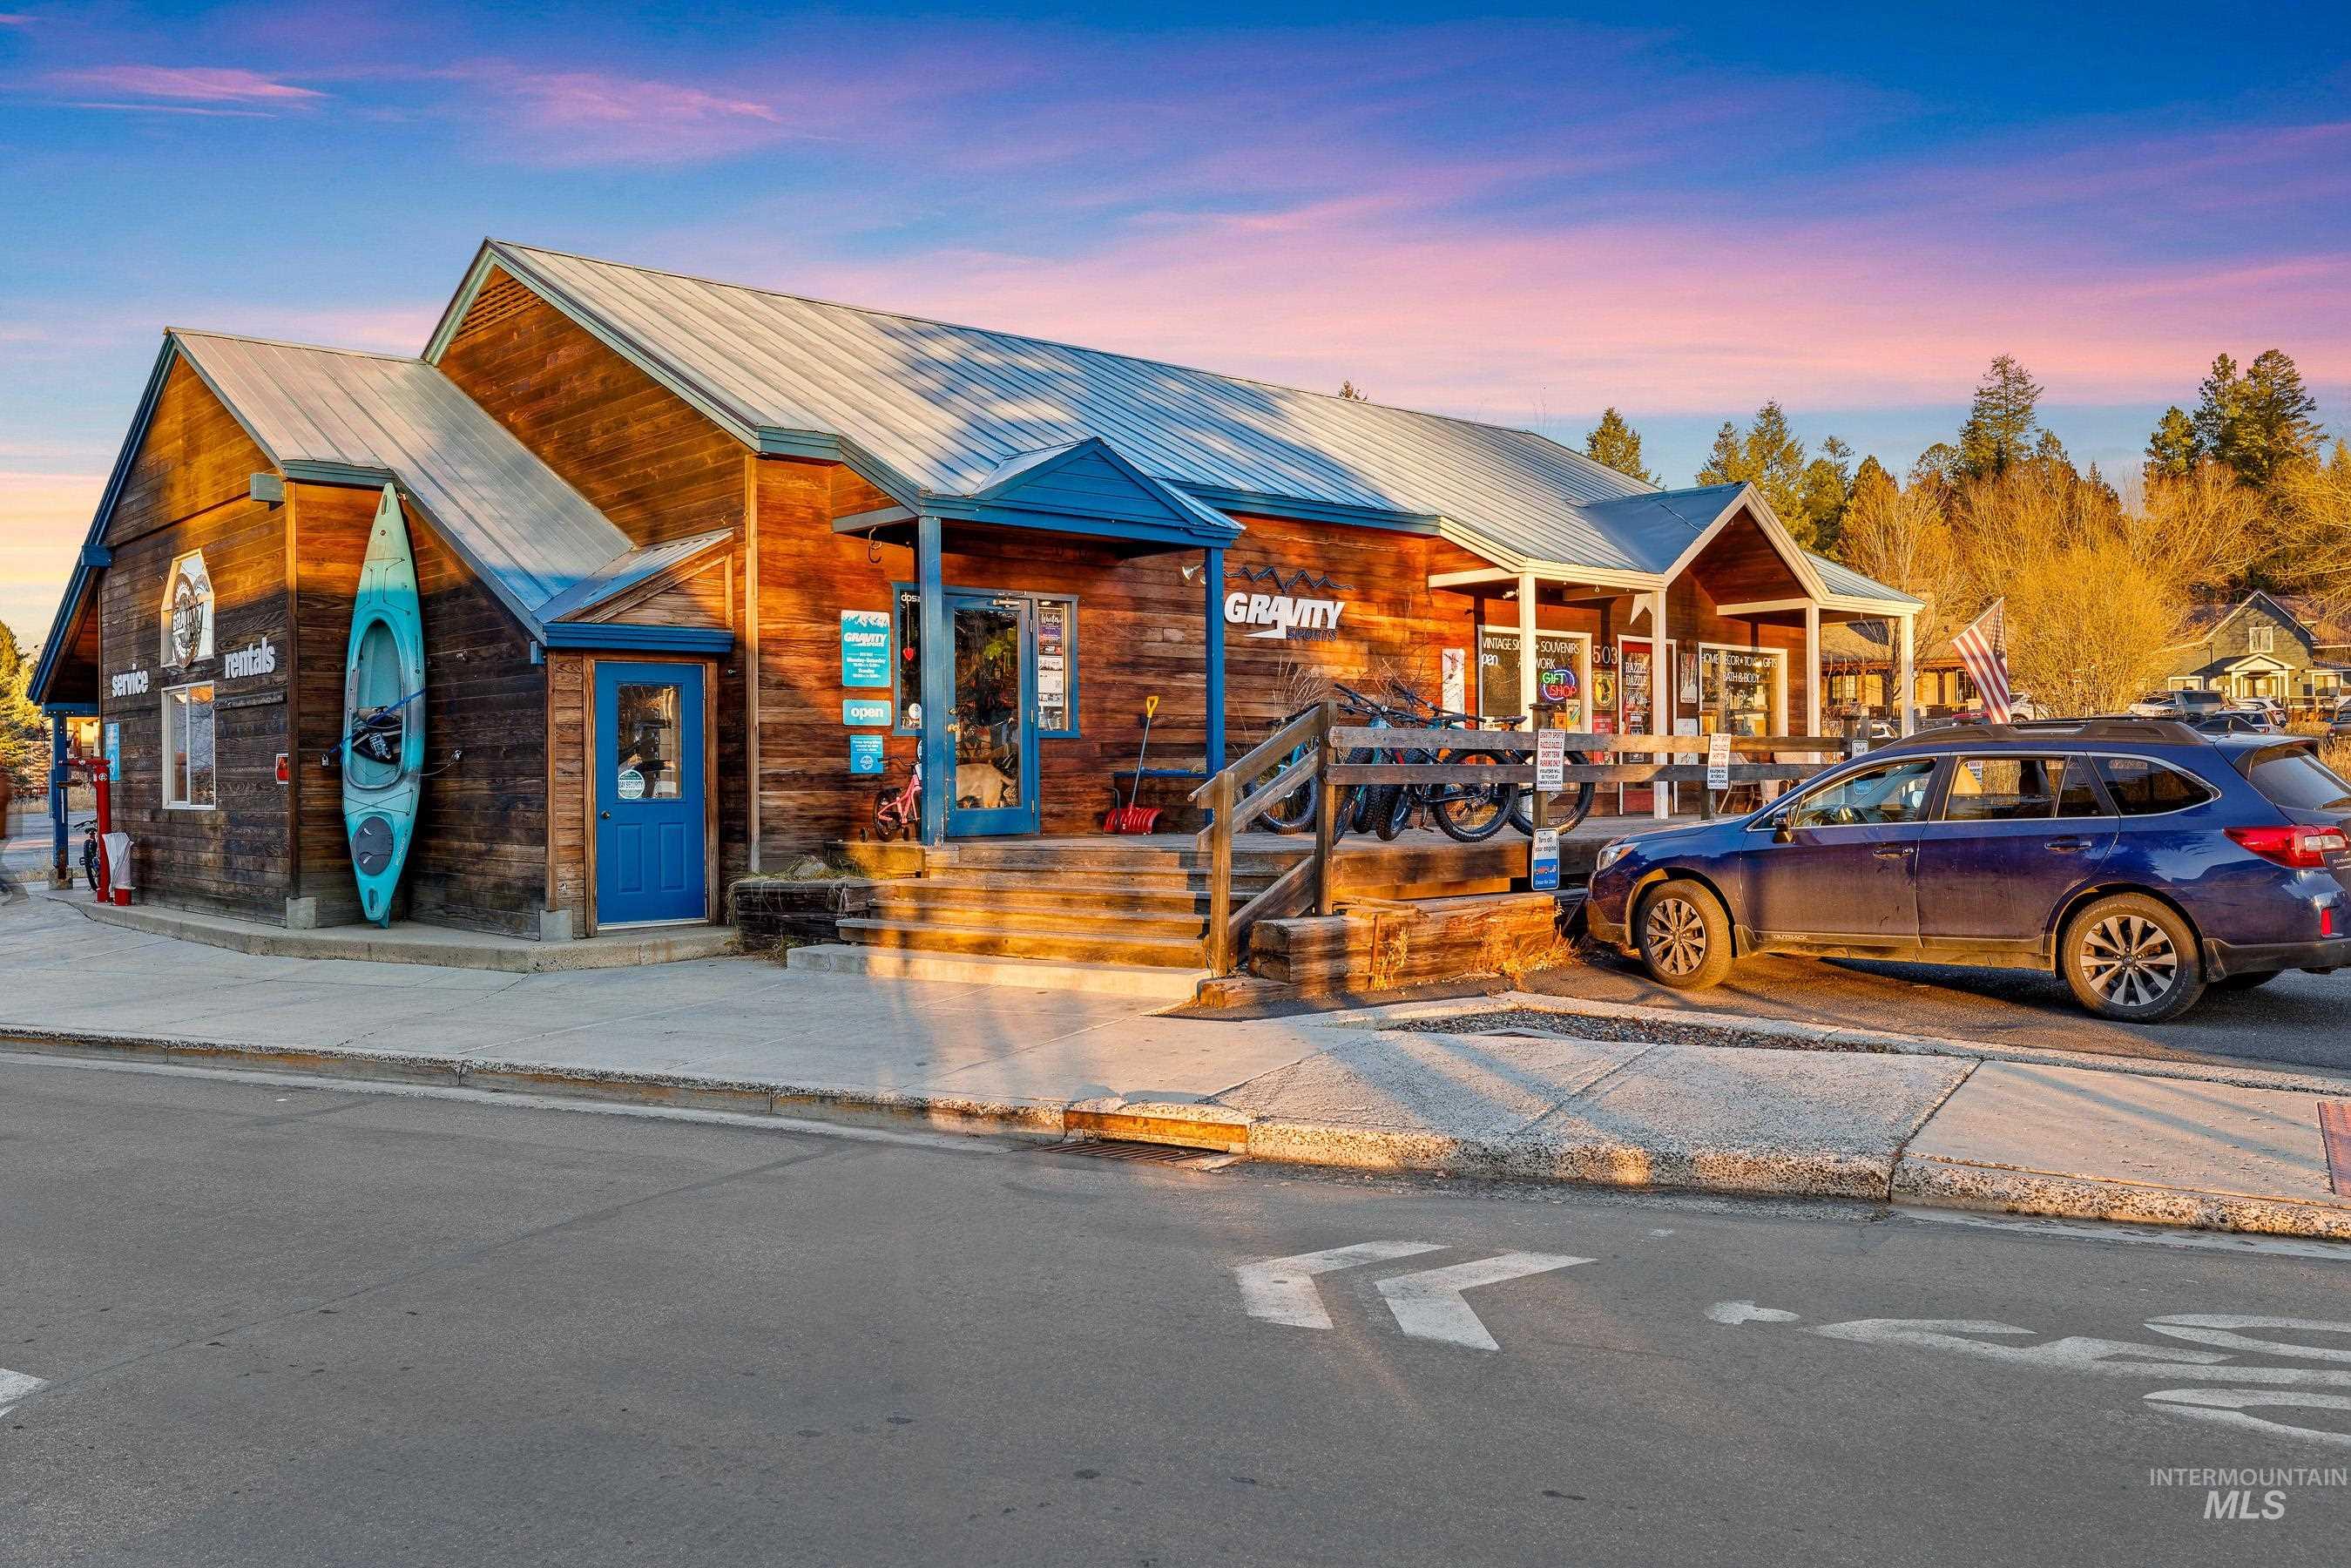 503 Pine Street, McCall, Idaho 83638, Business/Commercial For Sale, Price $1,850,000,MLS 98895347